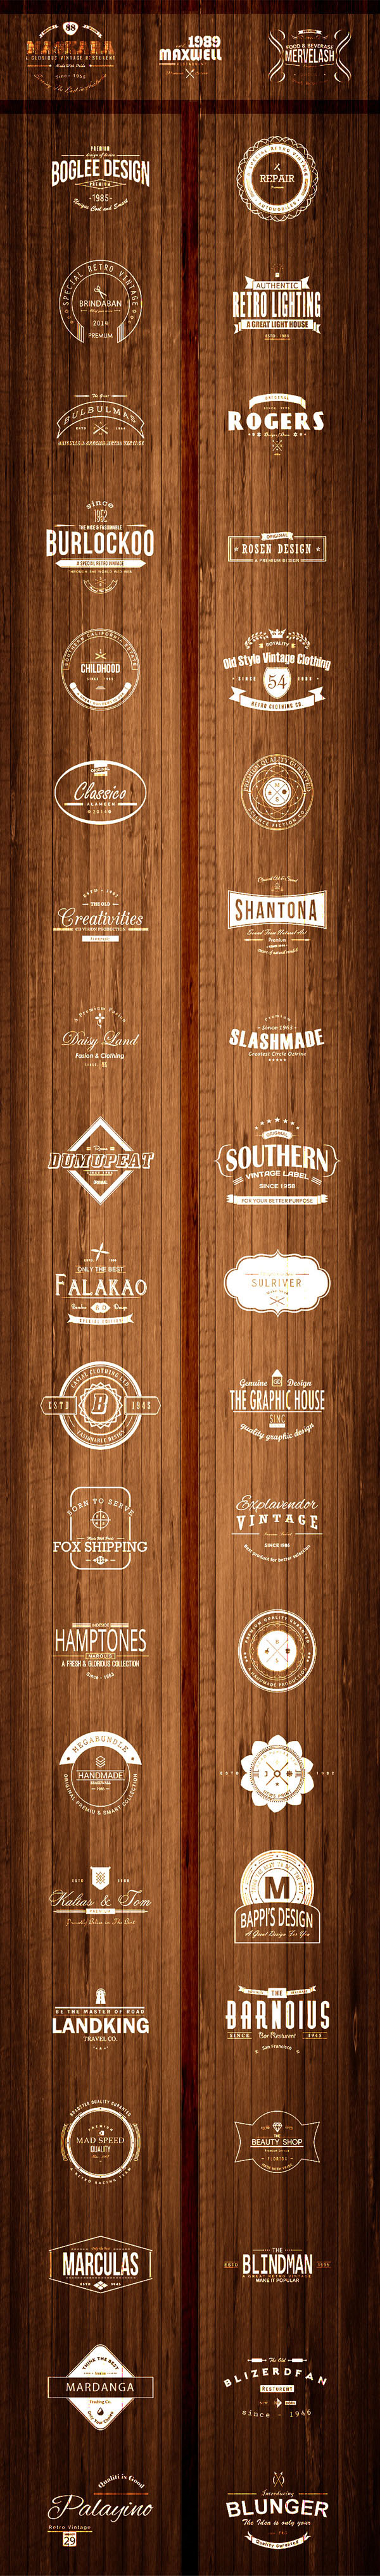 free-best-vintage-logos-badges-collection-graphic-designers-2014